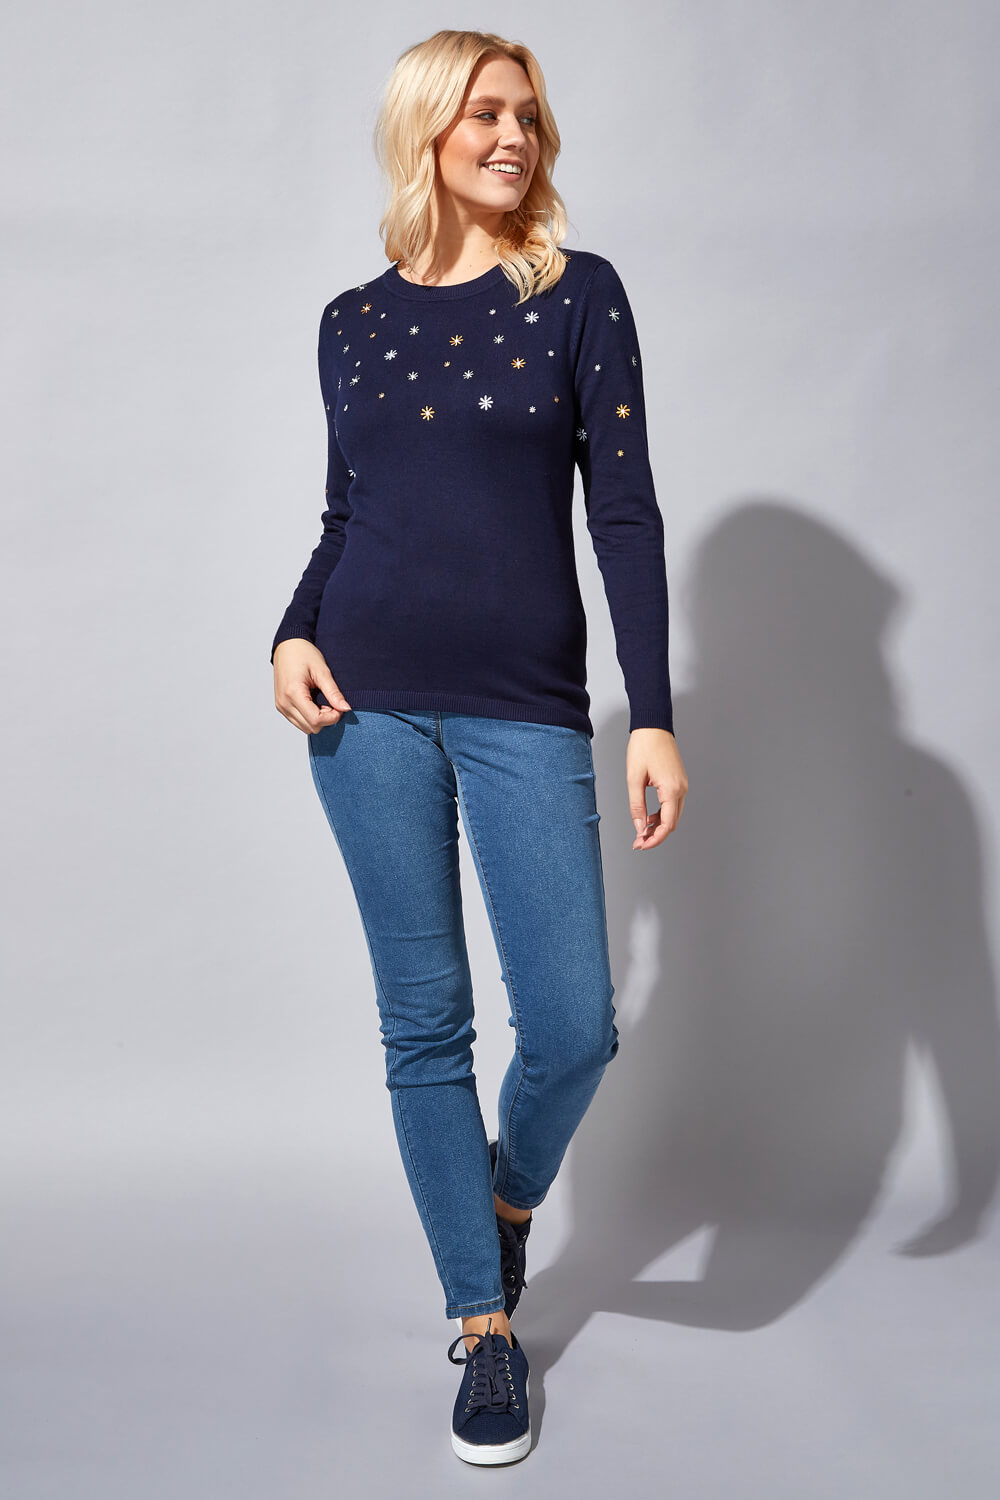 Navy  Daisy Floral Embroidered Jumper, Image 2 of 4